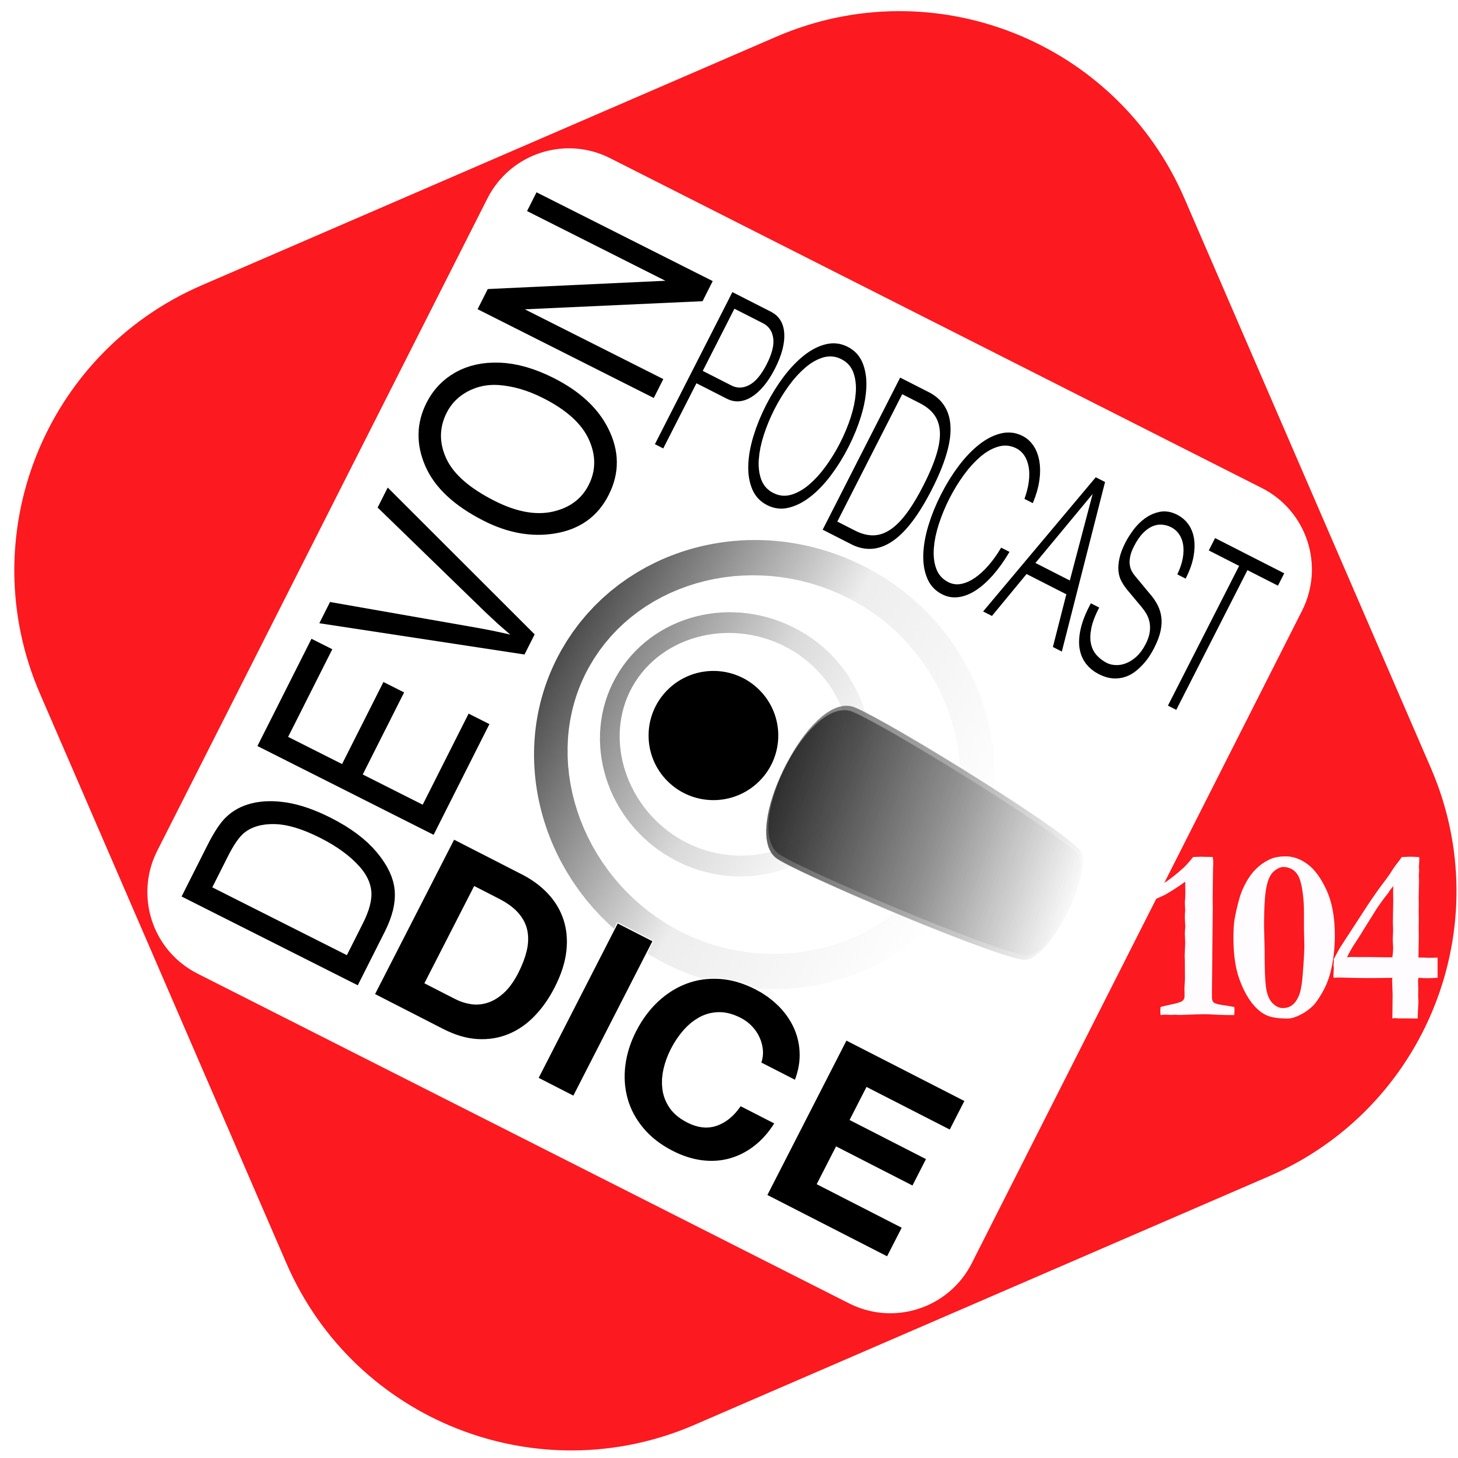 DDP 104 Guest Dan Apsey from the 24hr Board Game Marathon Event